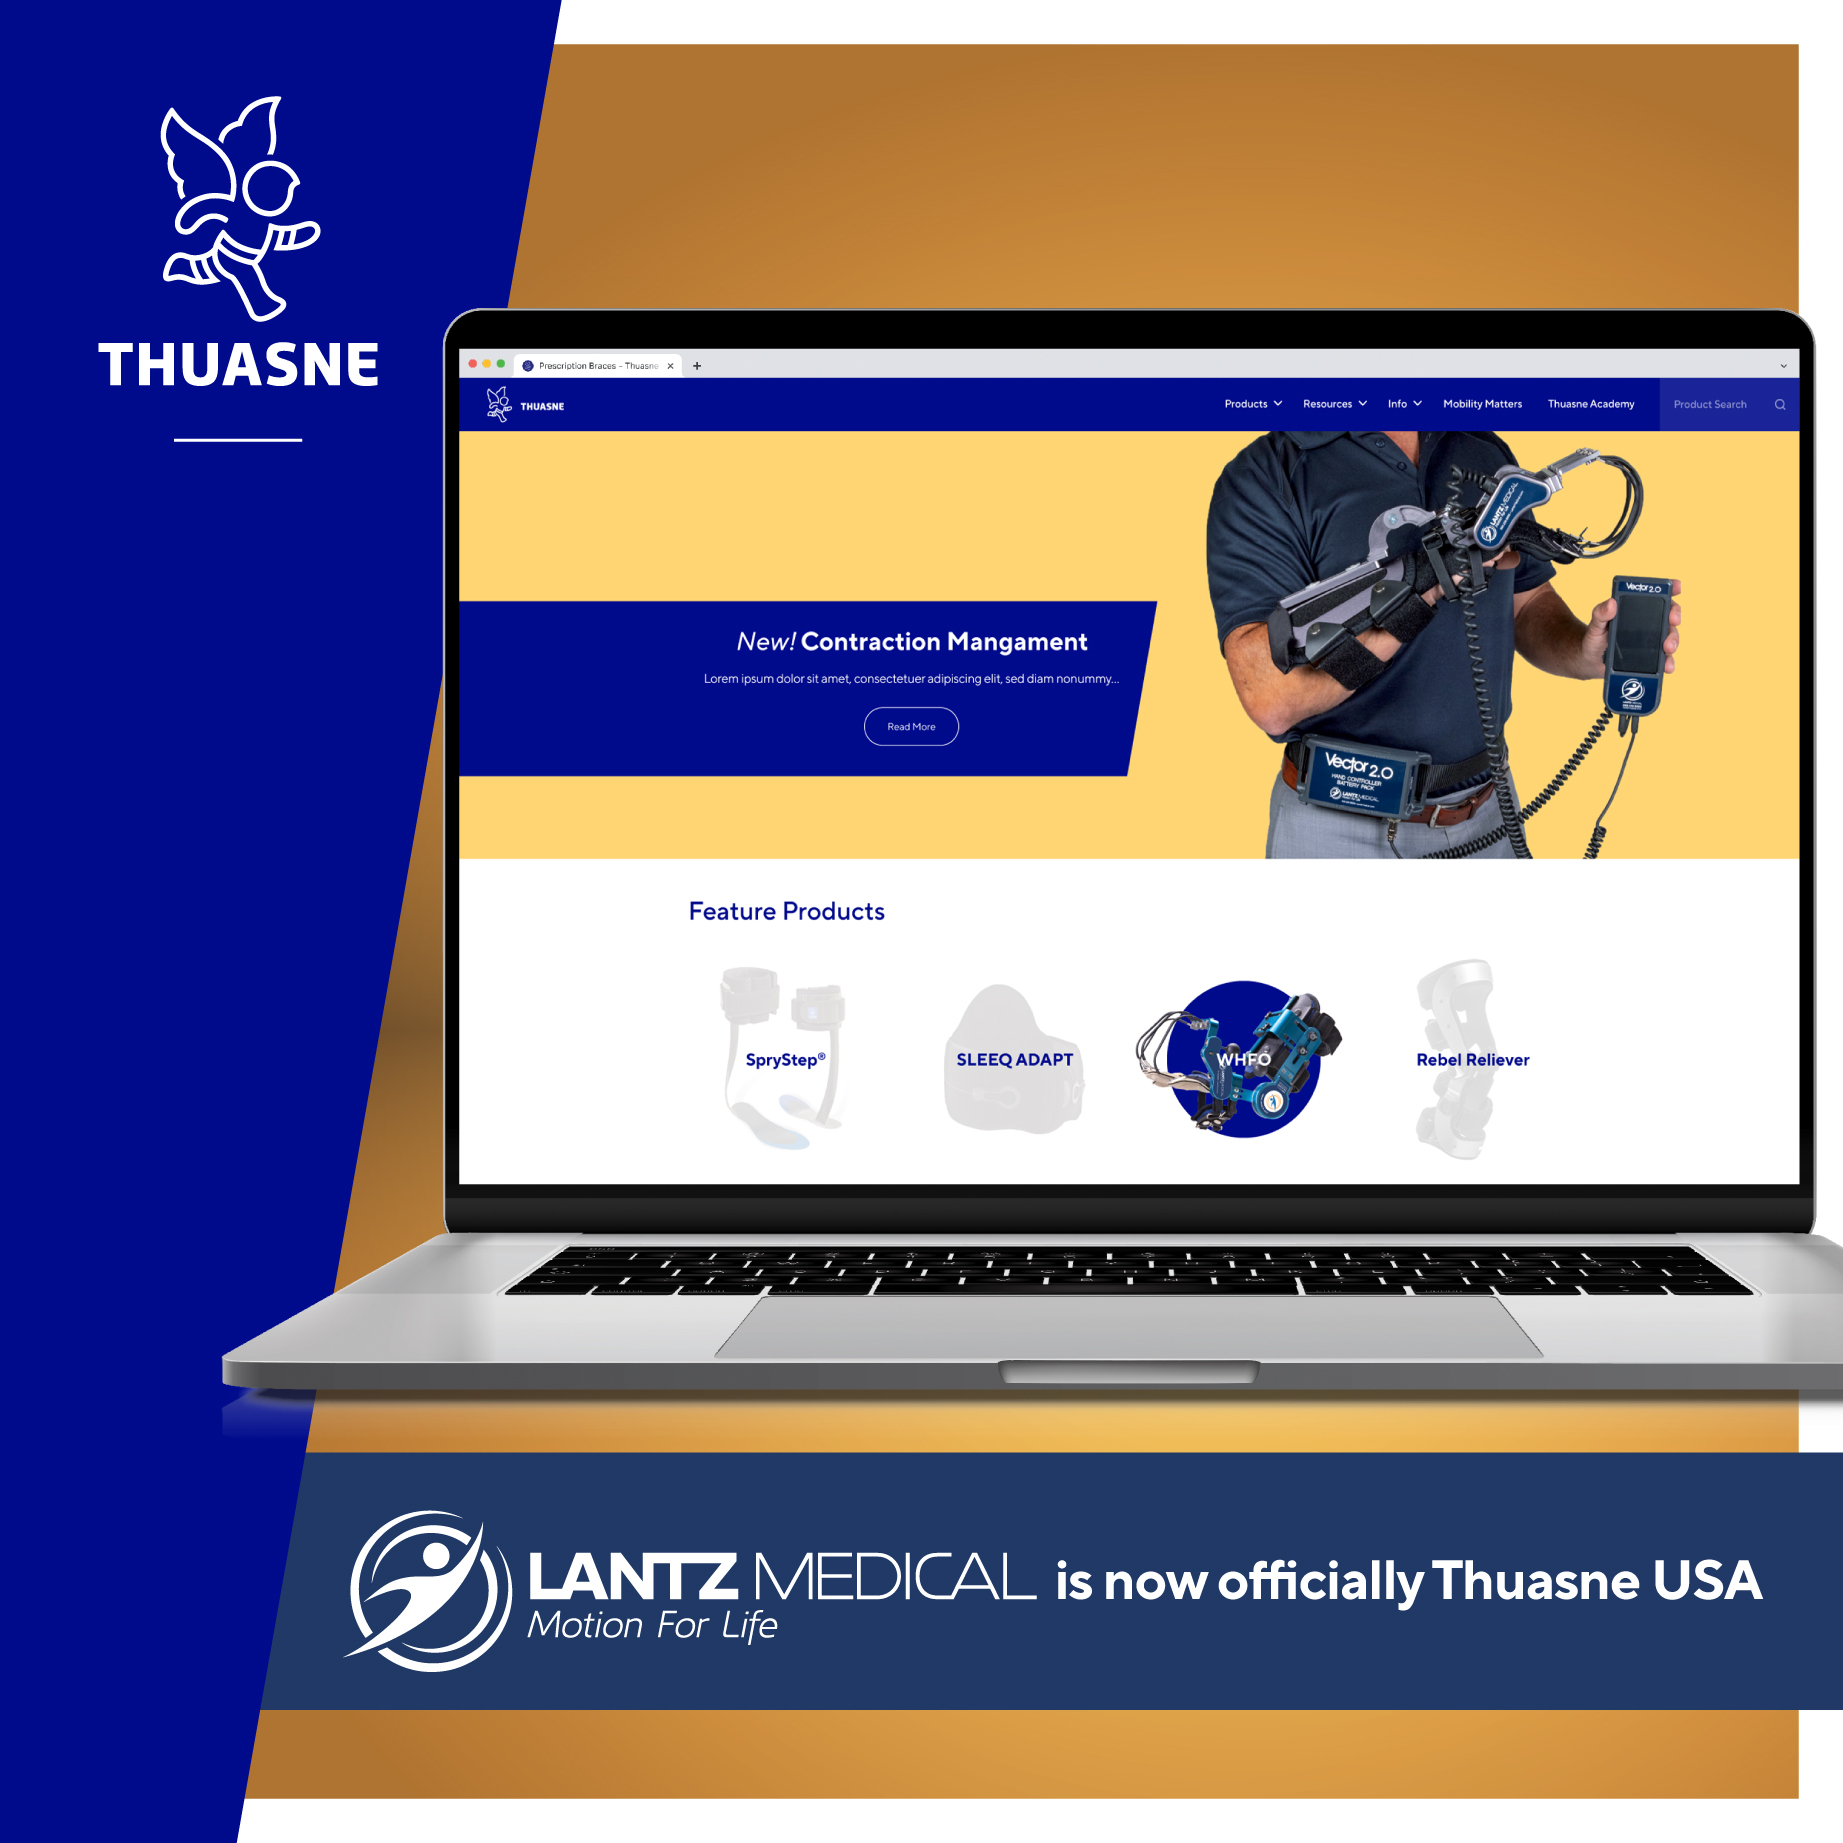 Lantz Medical is now officially Thuasne USA - Image